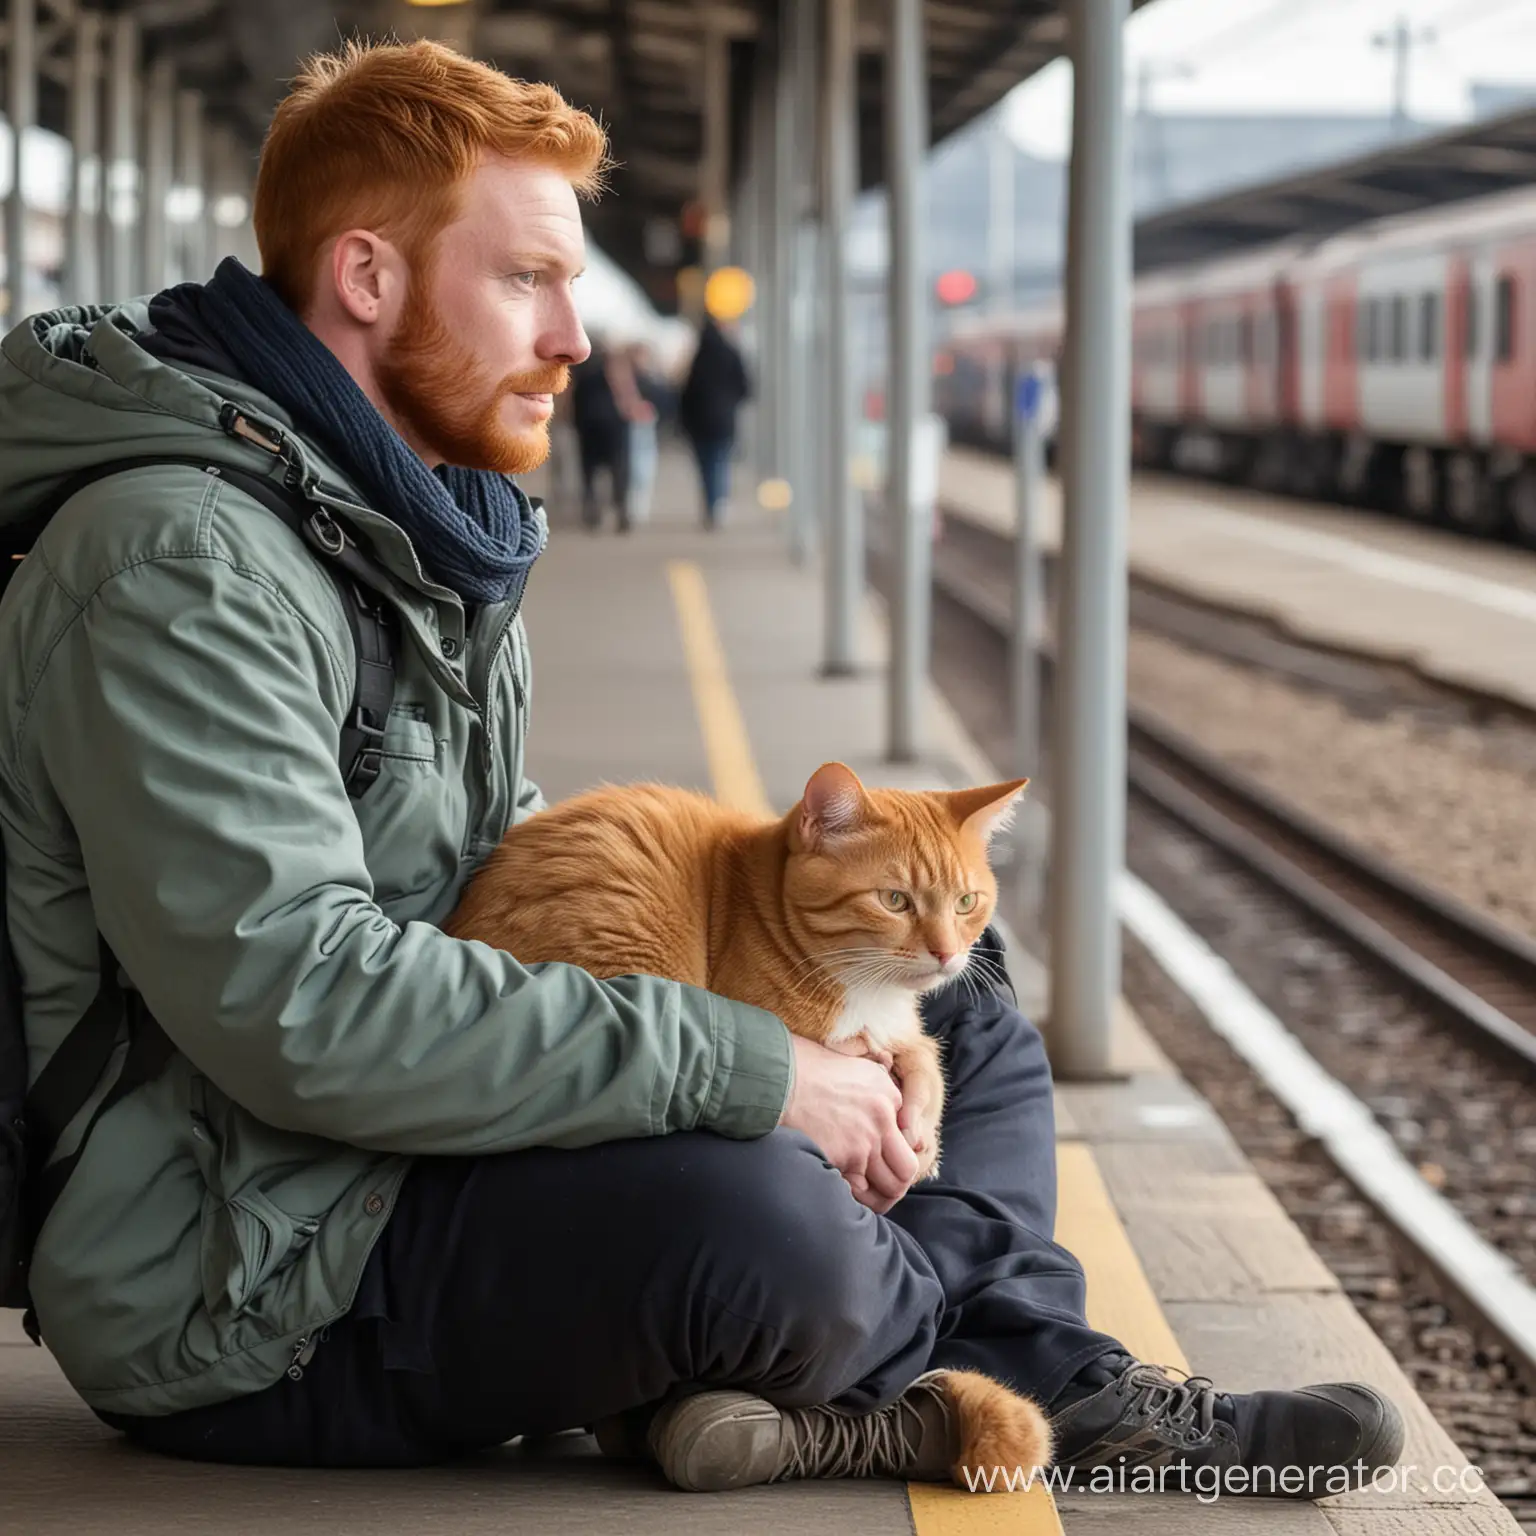 Man-with-Ginger-Cat-at-Train-Station